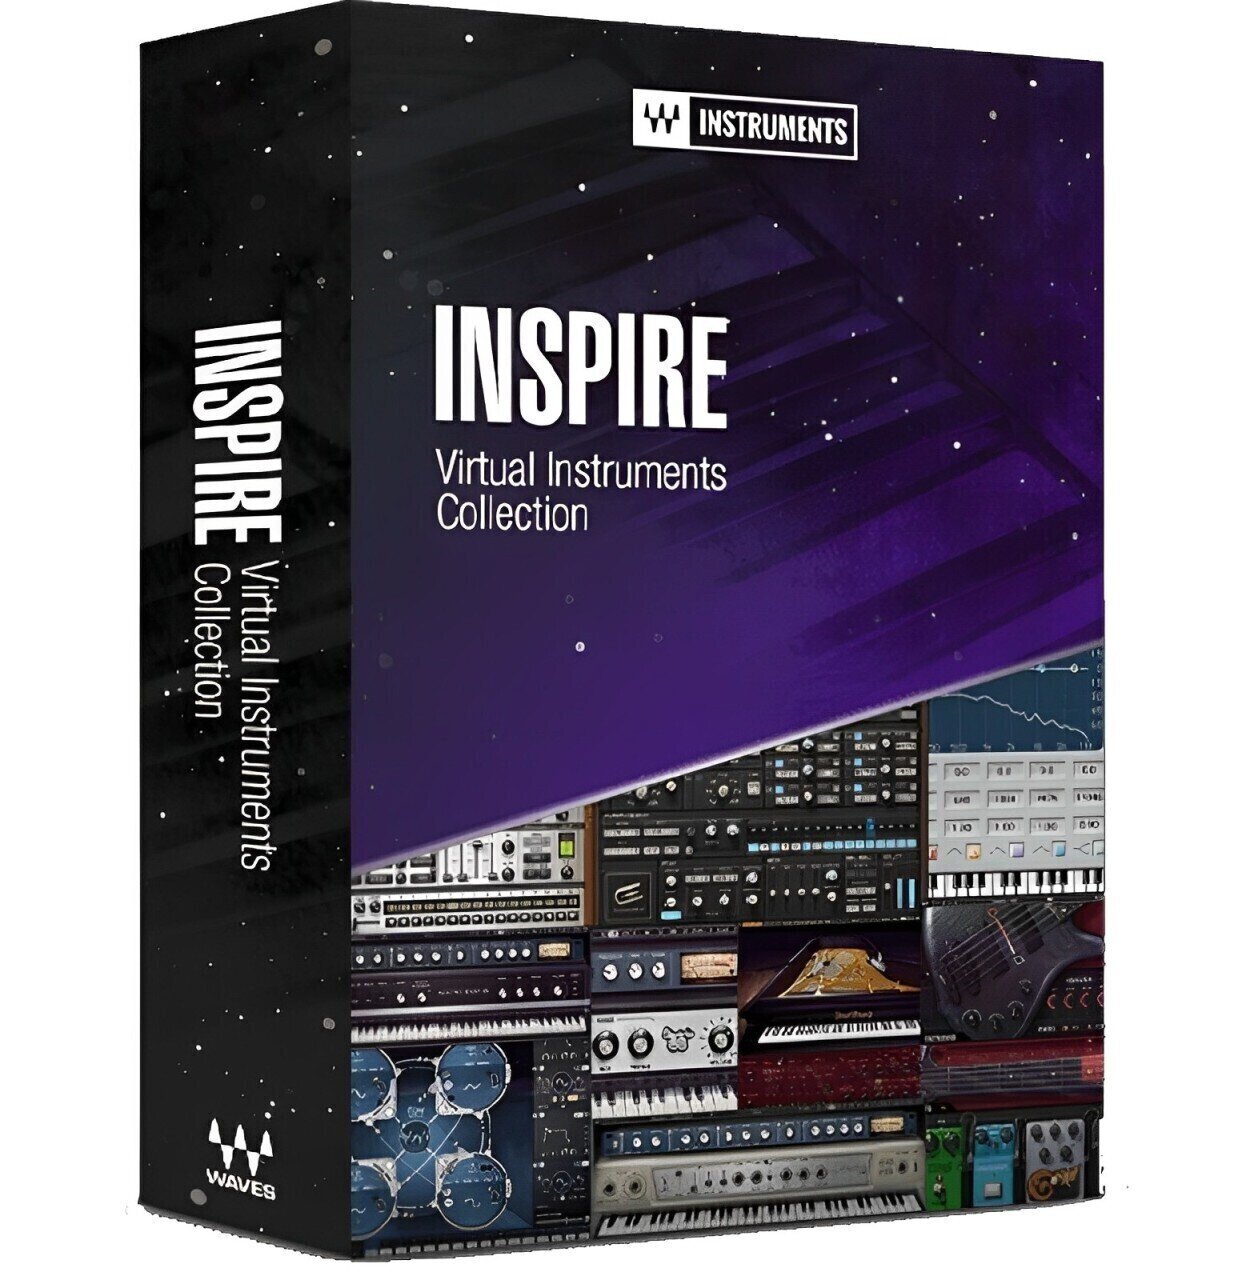 Studio software plug-in effect Waves Inspire Virtual Instruments Collection (Digitaal product)